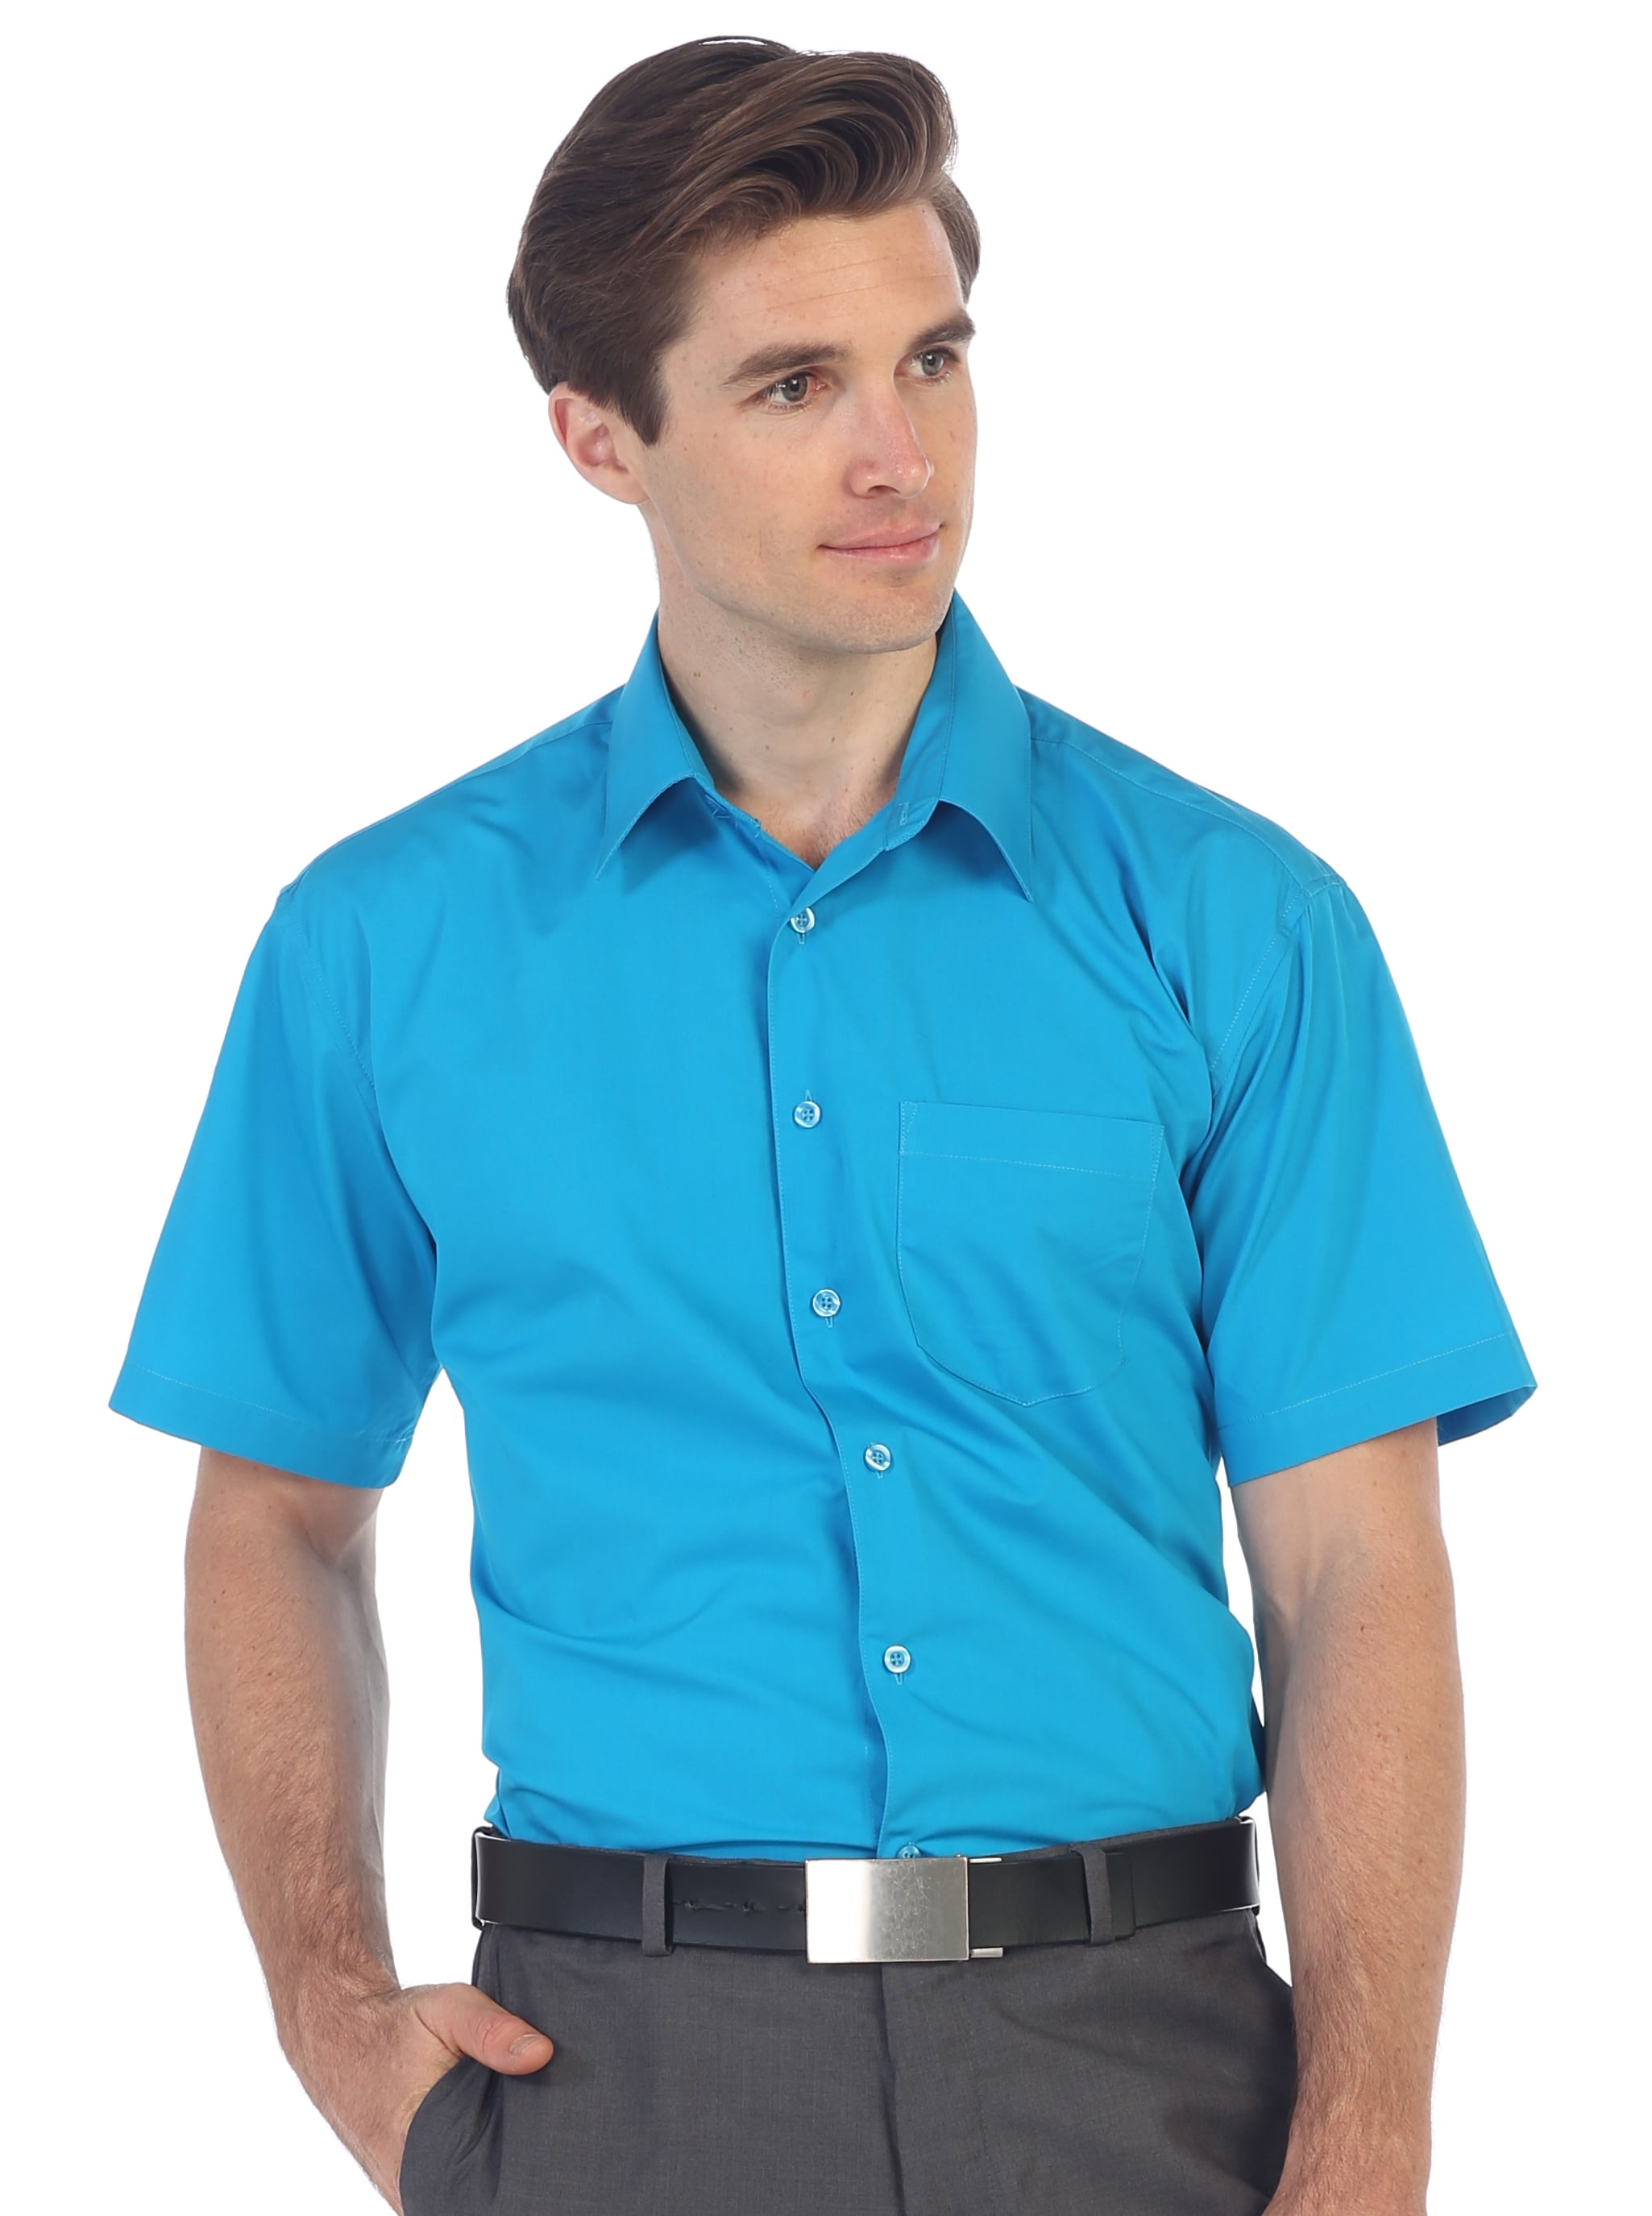 Men's Italian fashion Short Sleeve slim fit cotton Polo Shirt solid teal color 